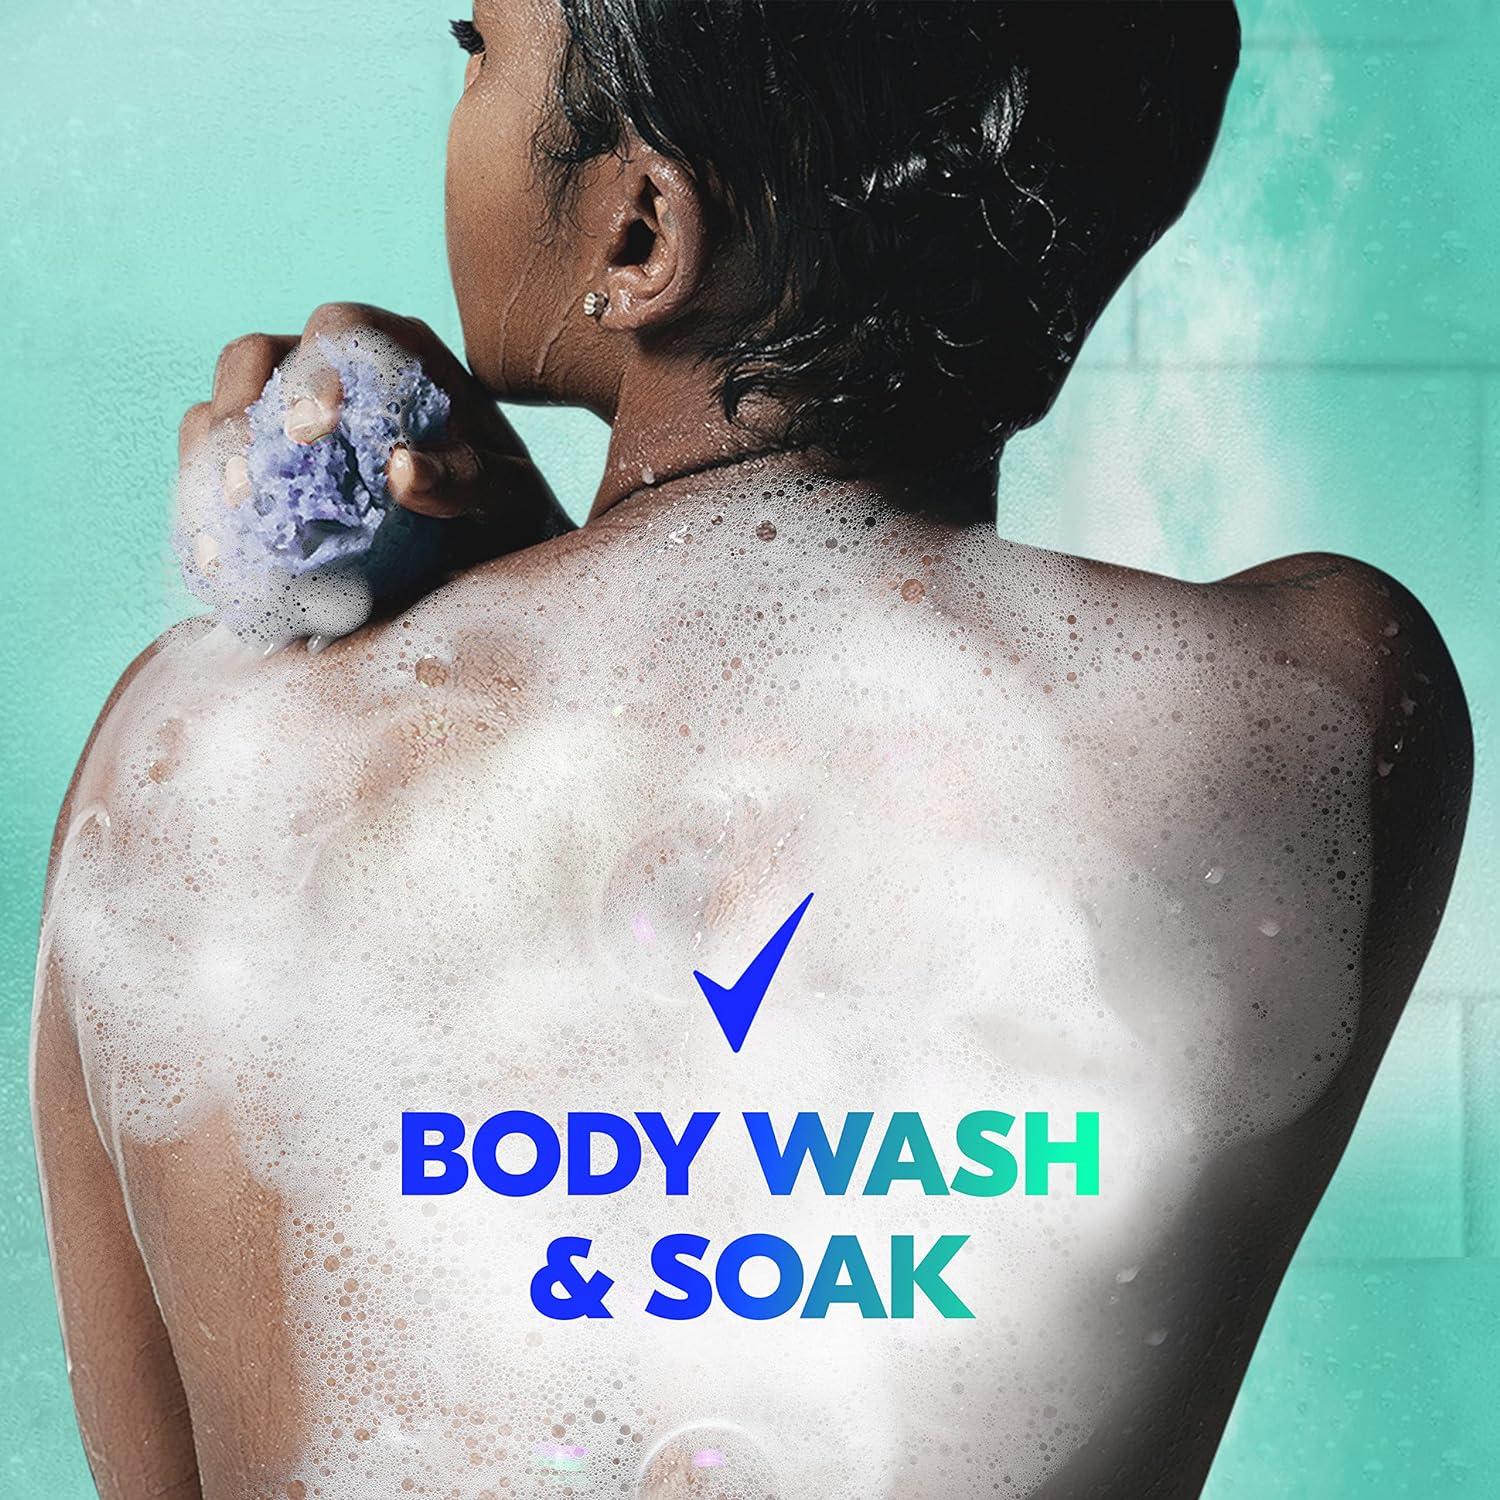 Degree Body Wash and Soak Post-Workout Recovery Skincare Routine ICY Mint + Epsom Salt + Electrolytes Bath and Body Product 22 oz 4 Count : Beauty & Personal Care